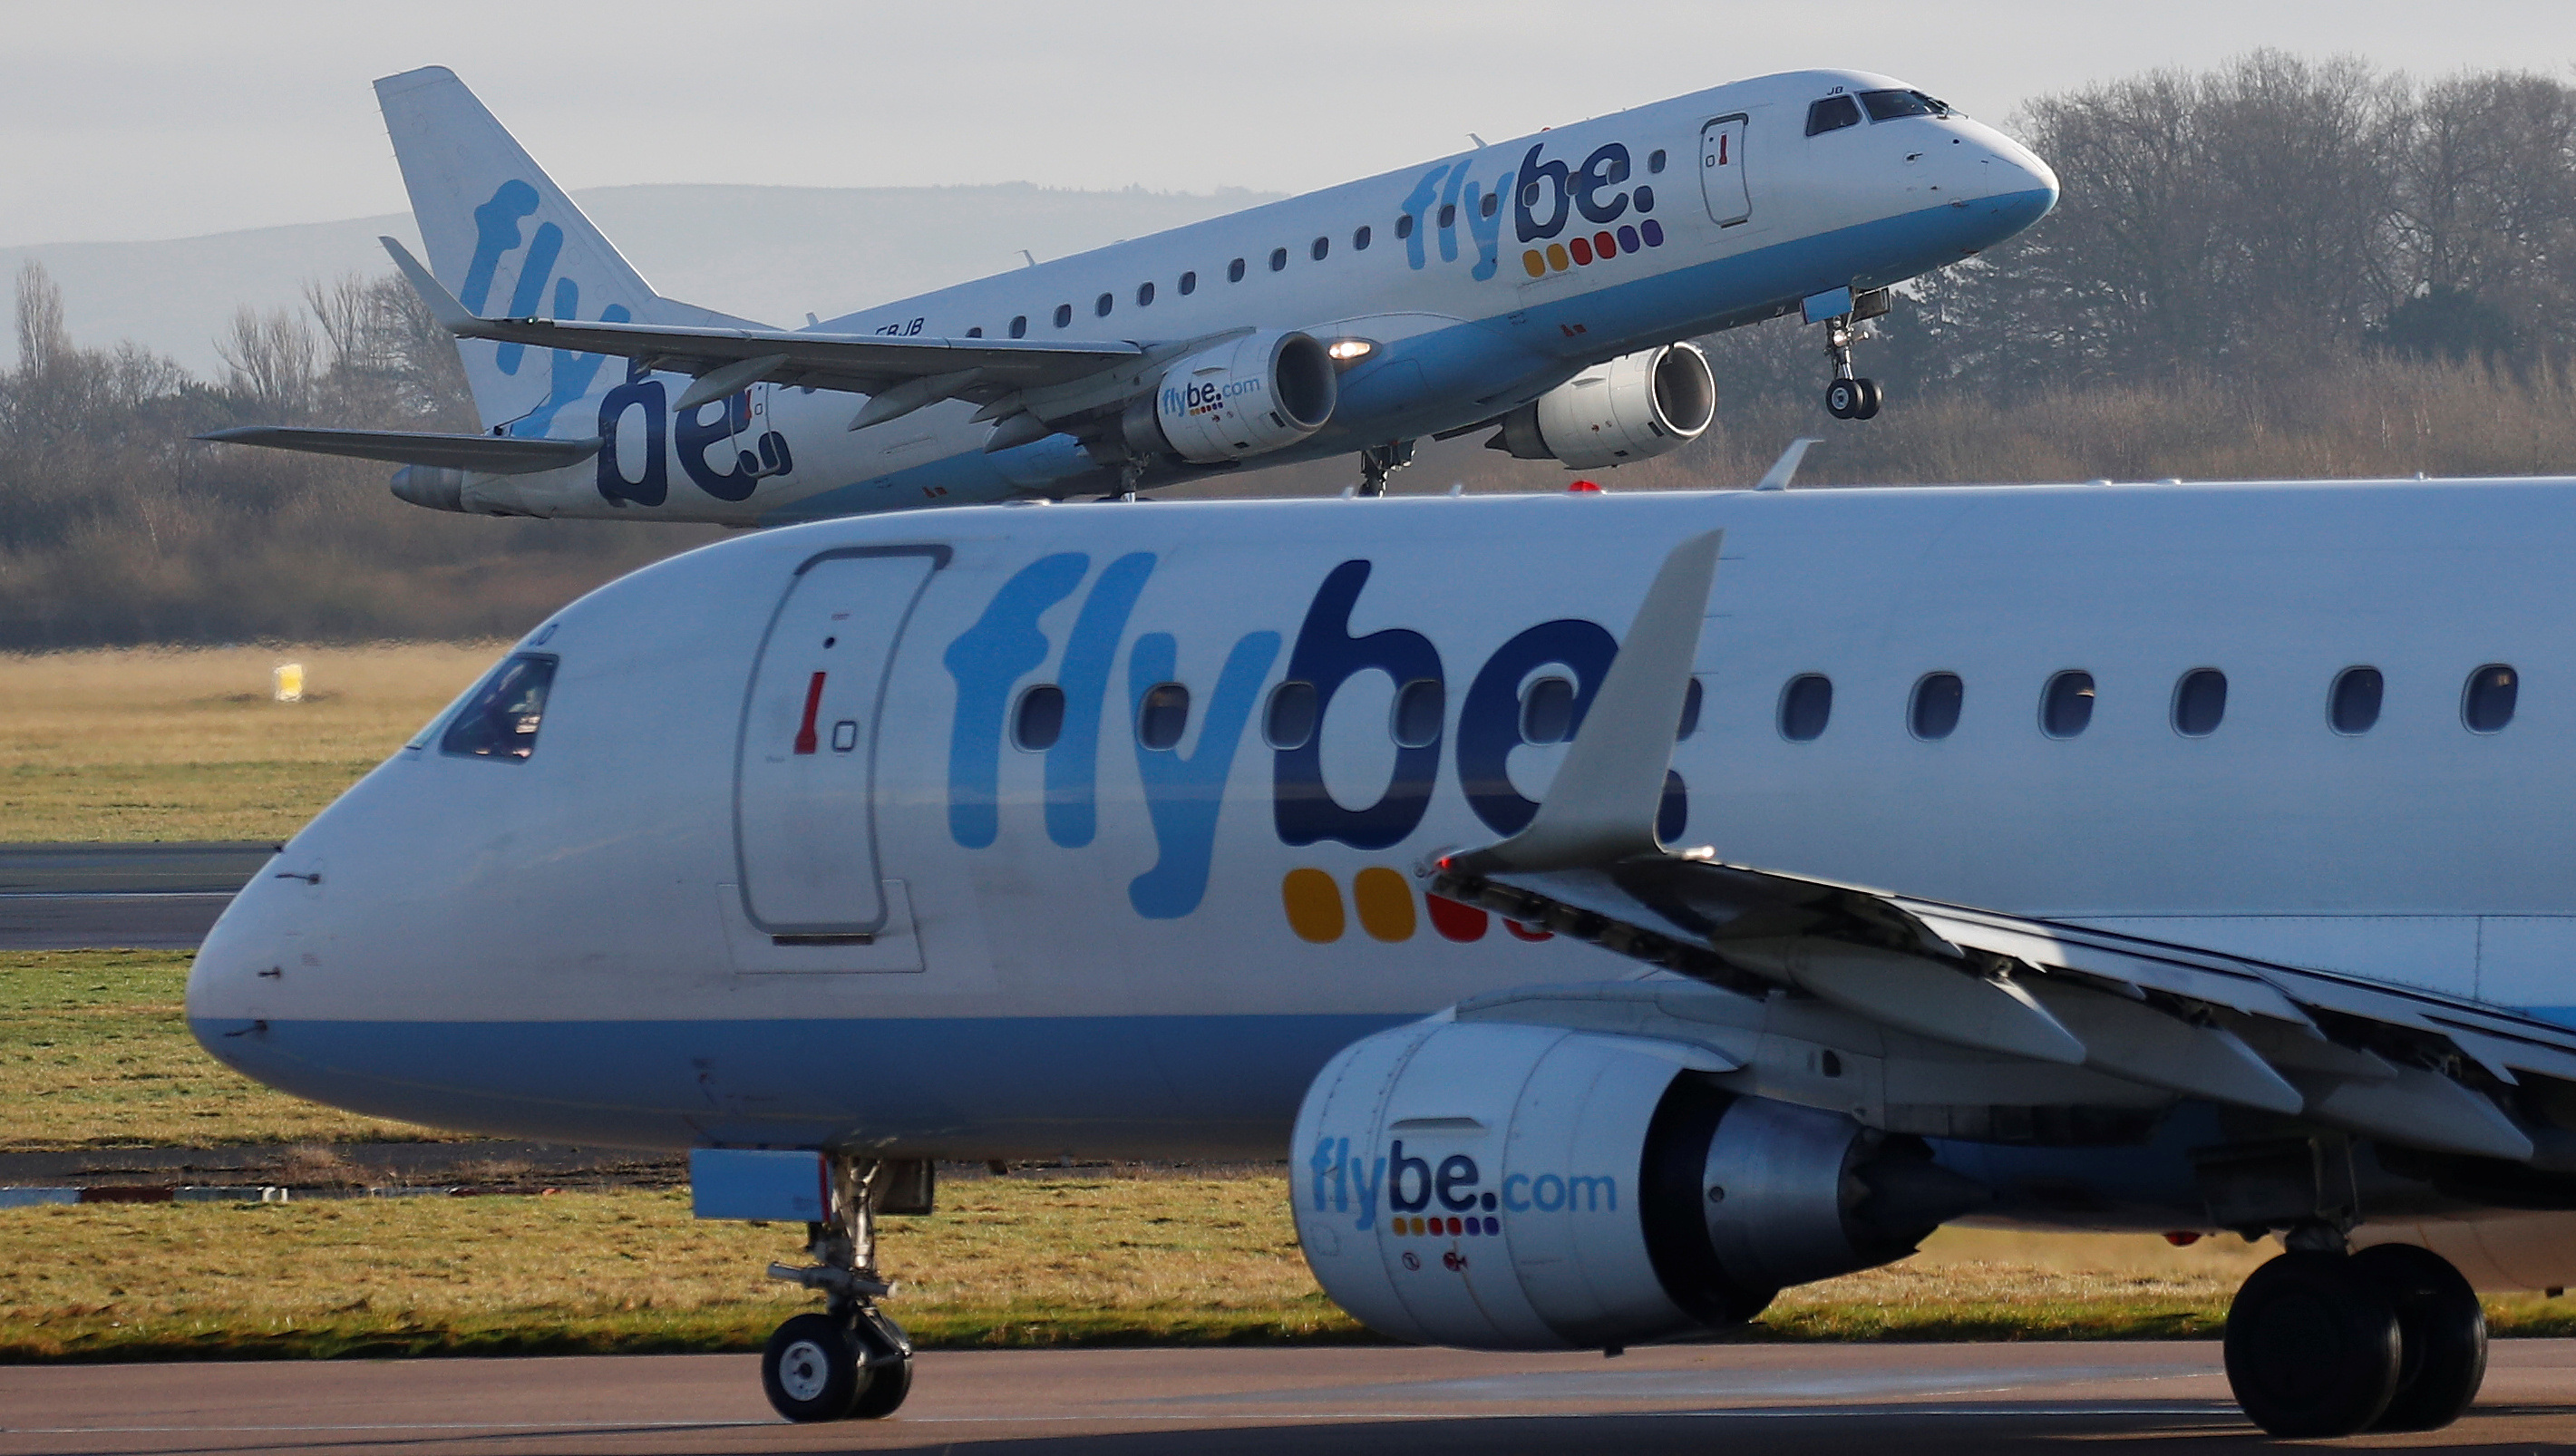 A Flybe plane takes off from Manchester Airport in Manchester